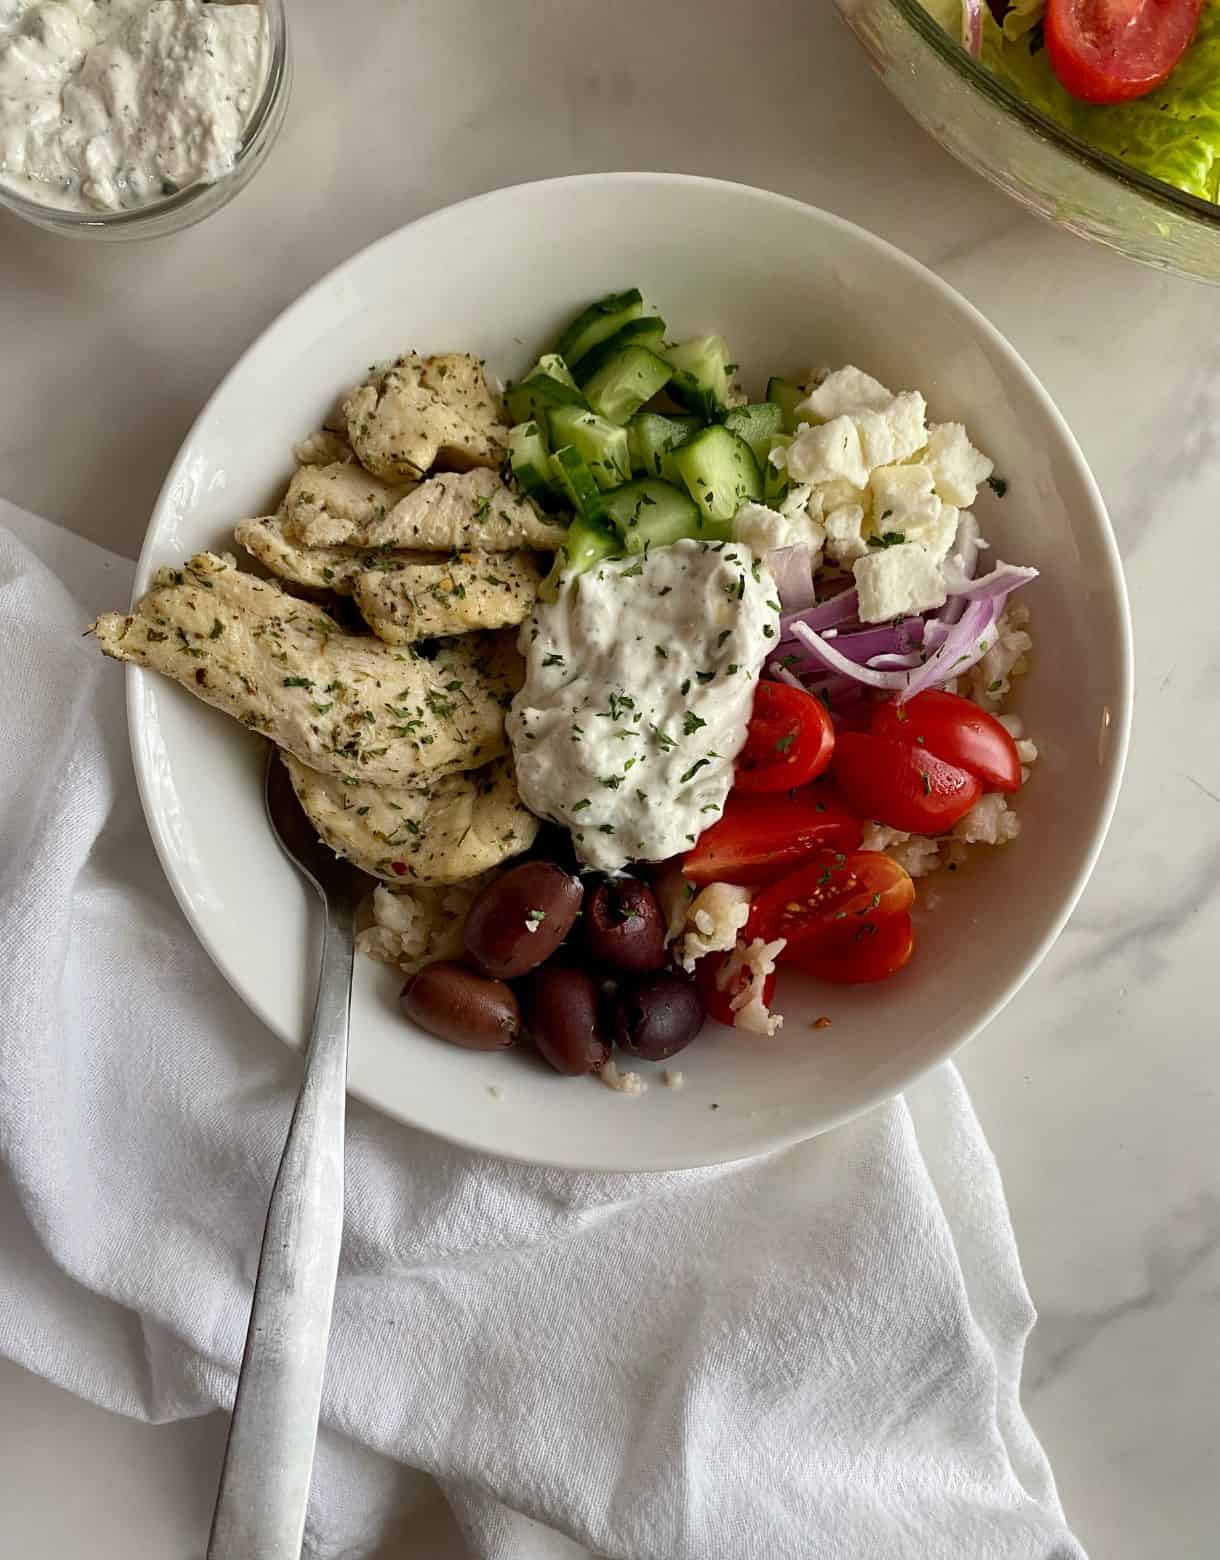 A Chicken Tzatziki Bowl with cauliflower rice, cooked chicken, olives, cucumbers, feta, tomatoes, red onion and tzatziki sauce.